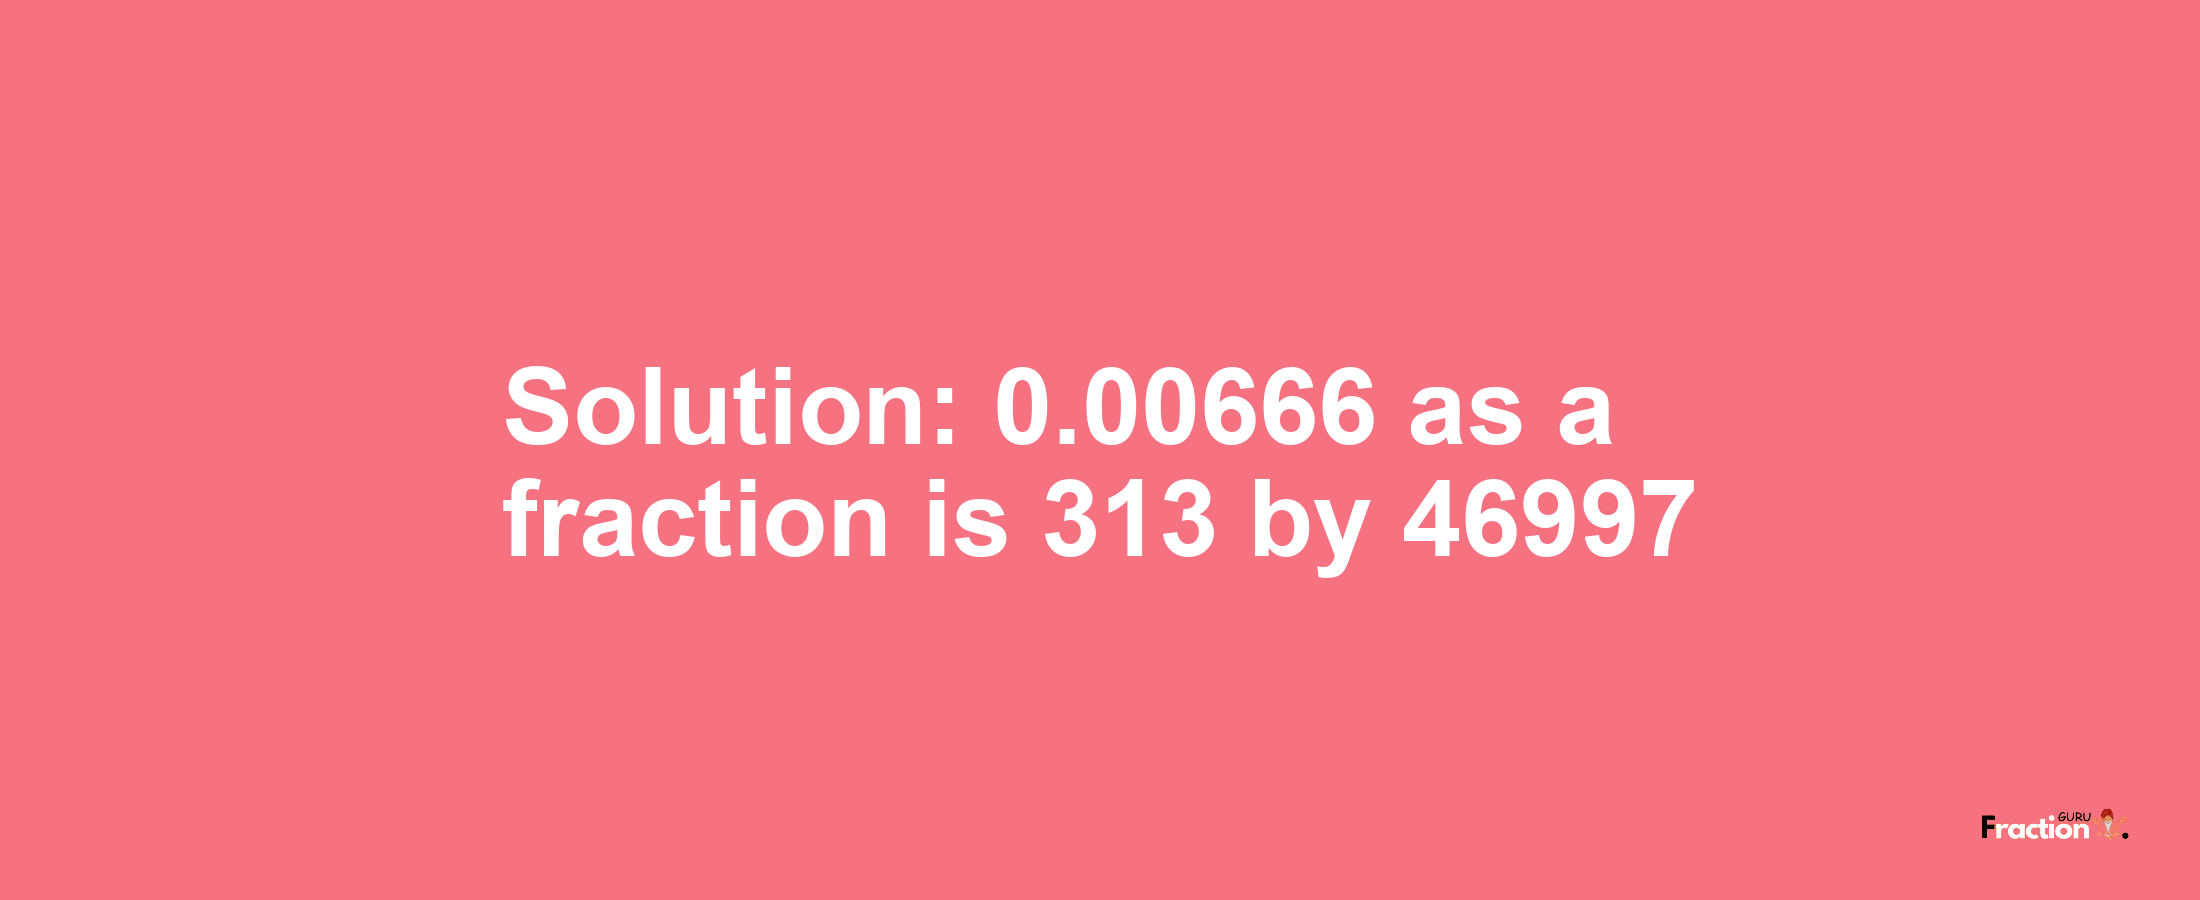 Solution:0.00666 as a fraction is 313/46997